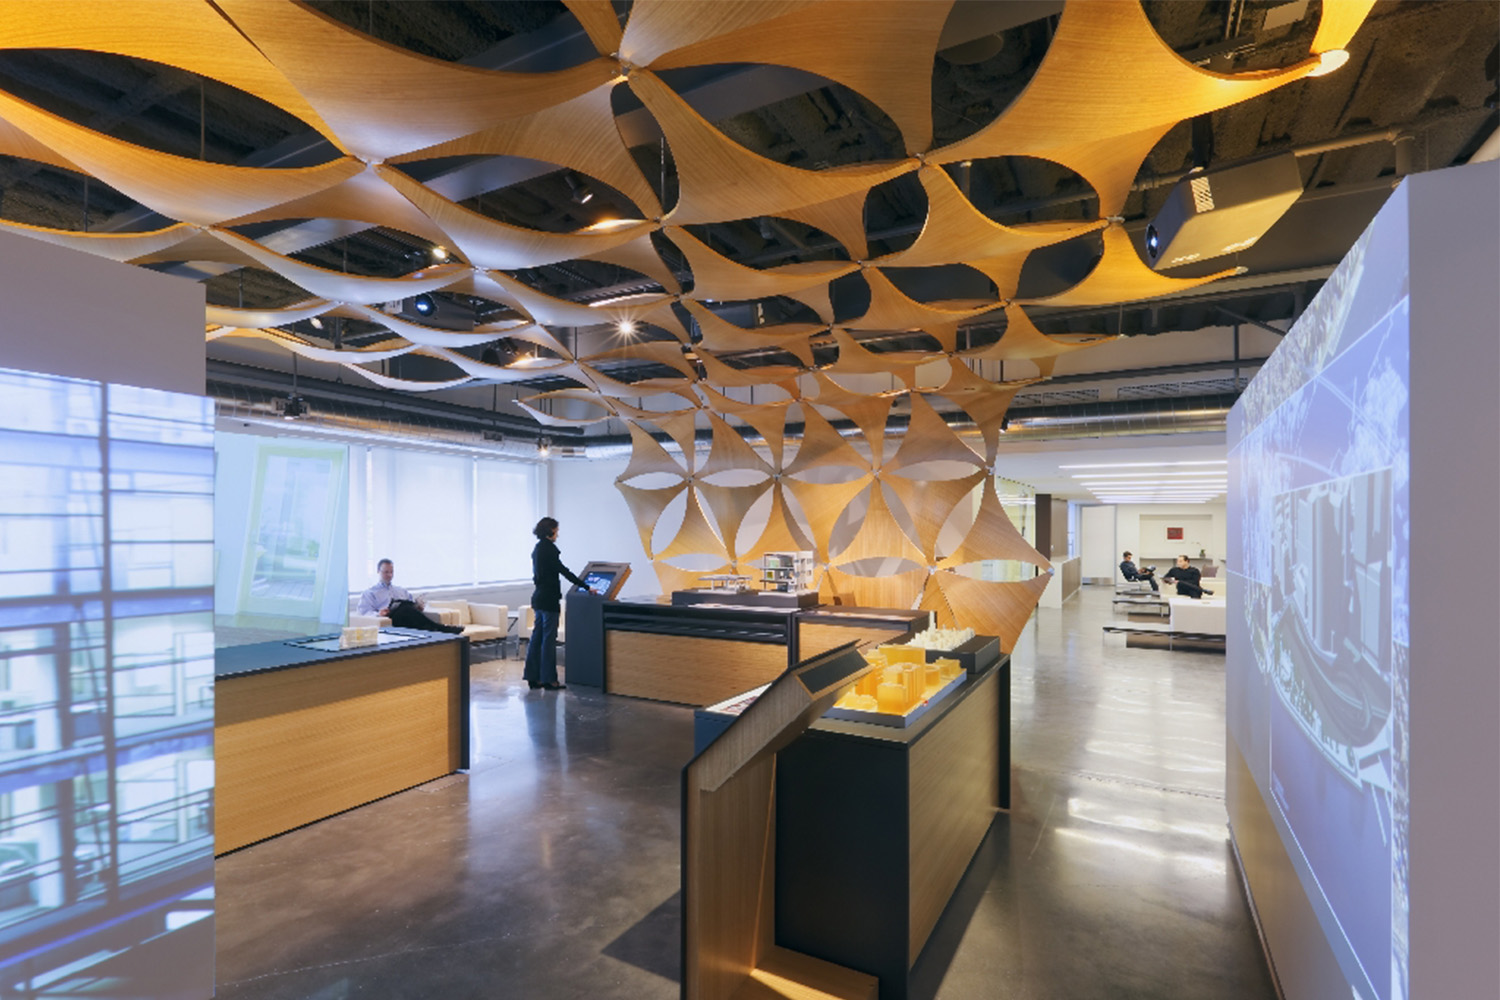 Millwork ceiling detail at Autodesk headquarters 